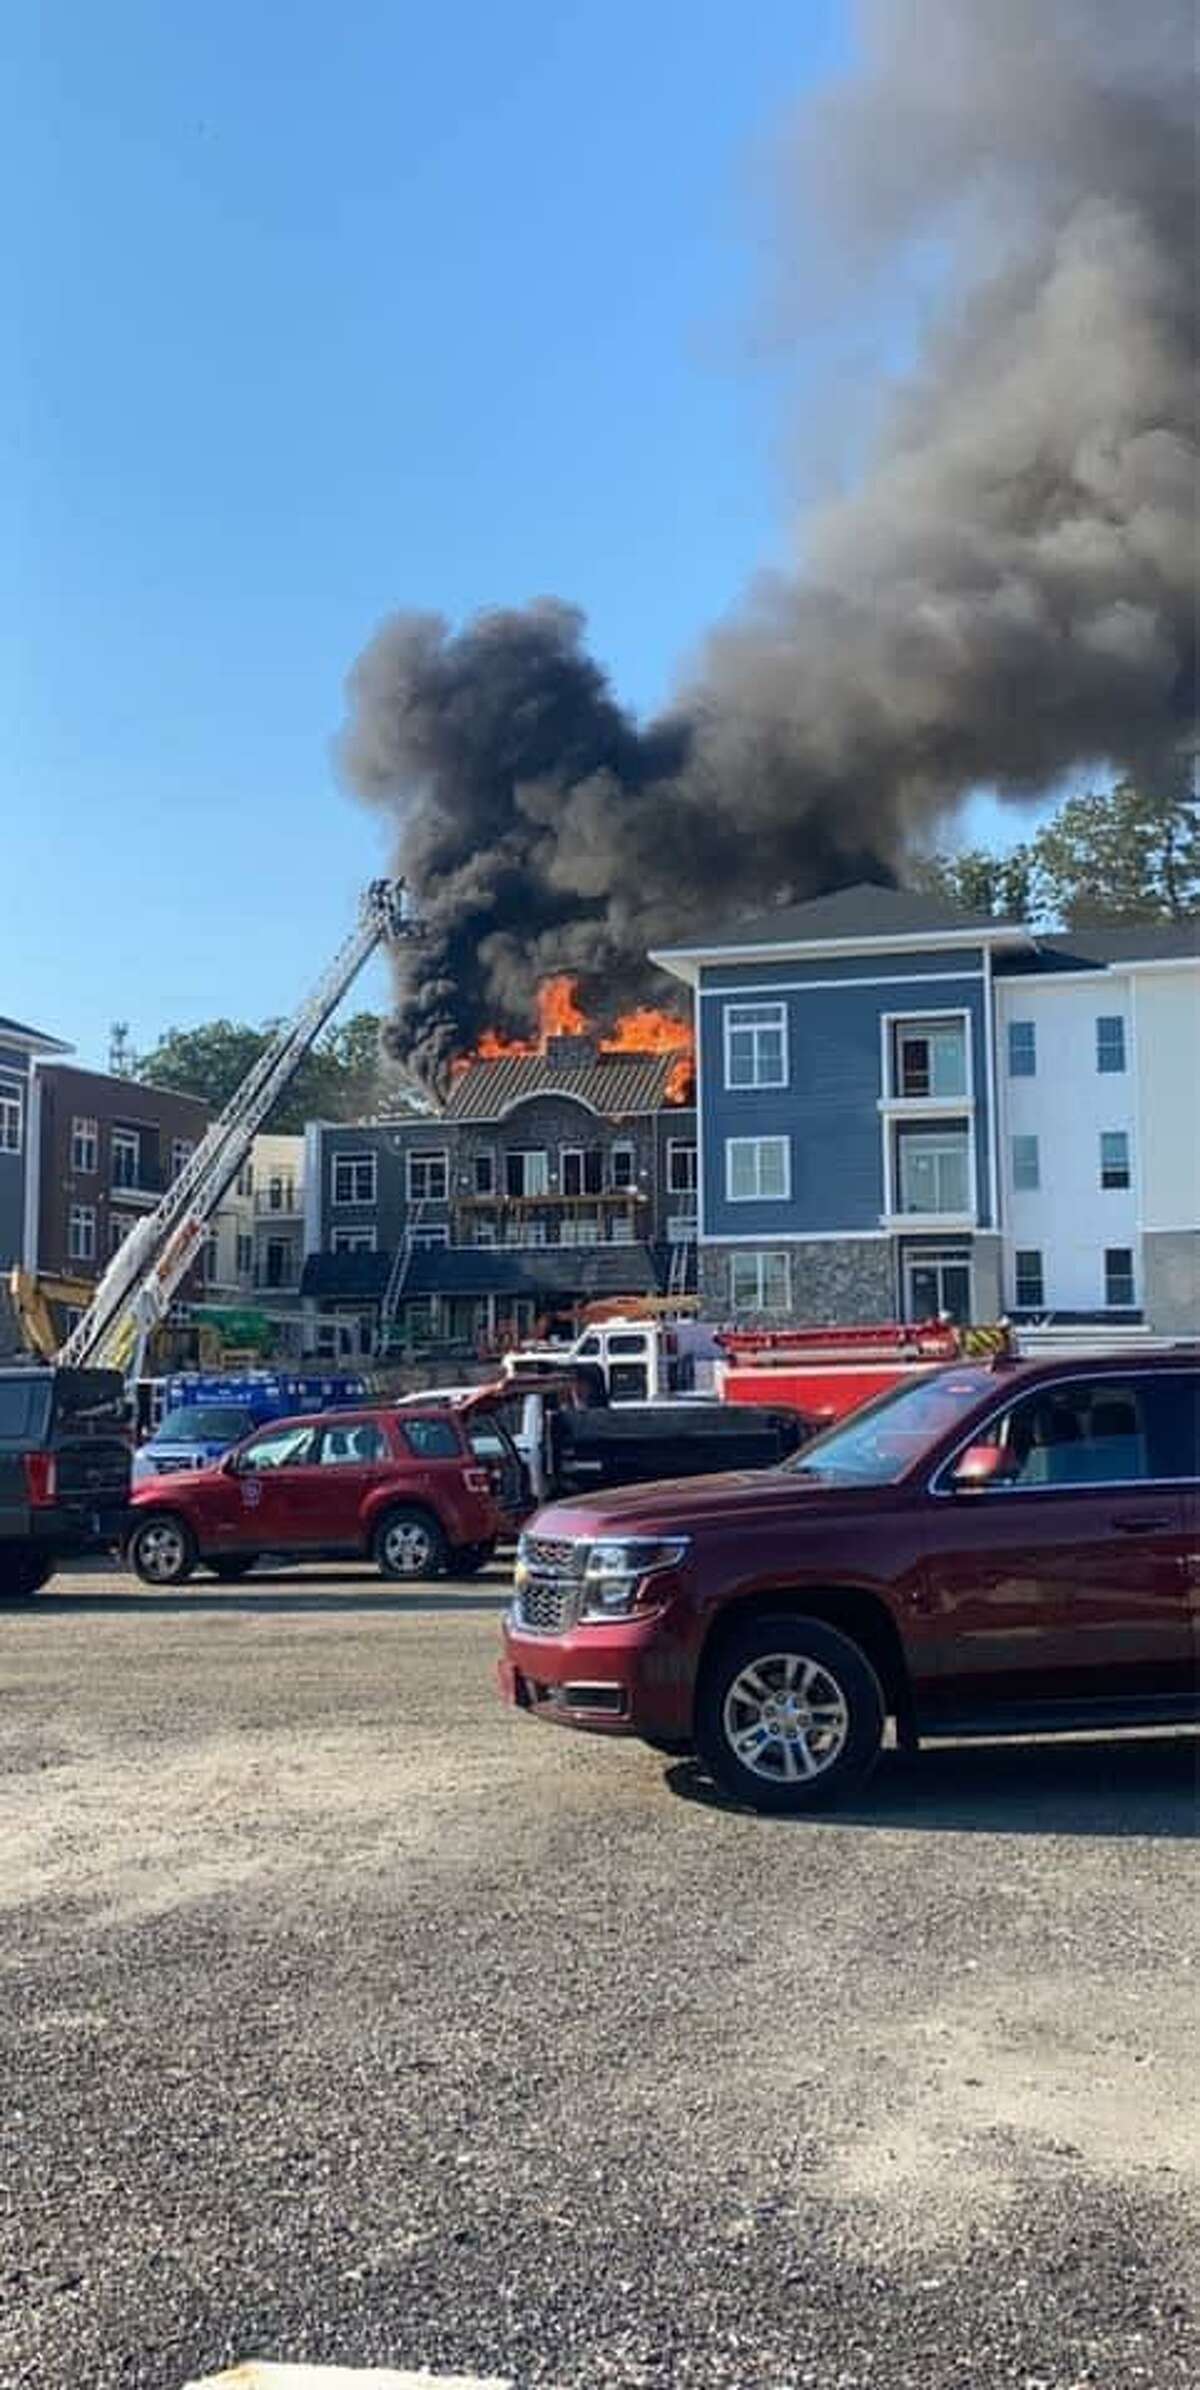 Units on scene at a fire in Oxford, Conn., on Monday, July 27, 2020.